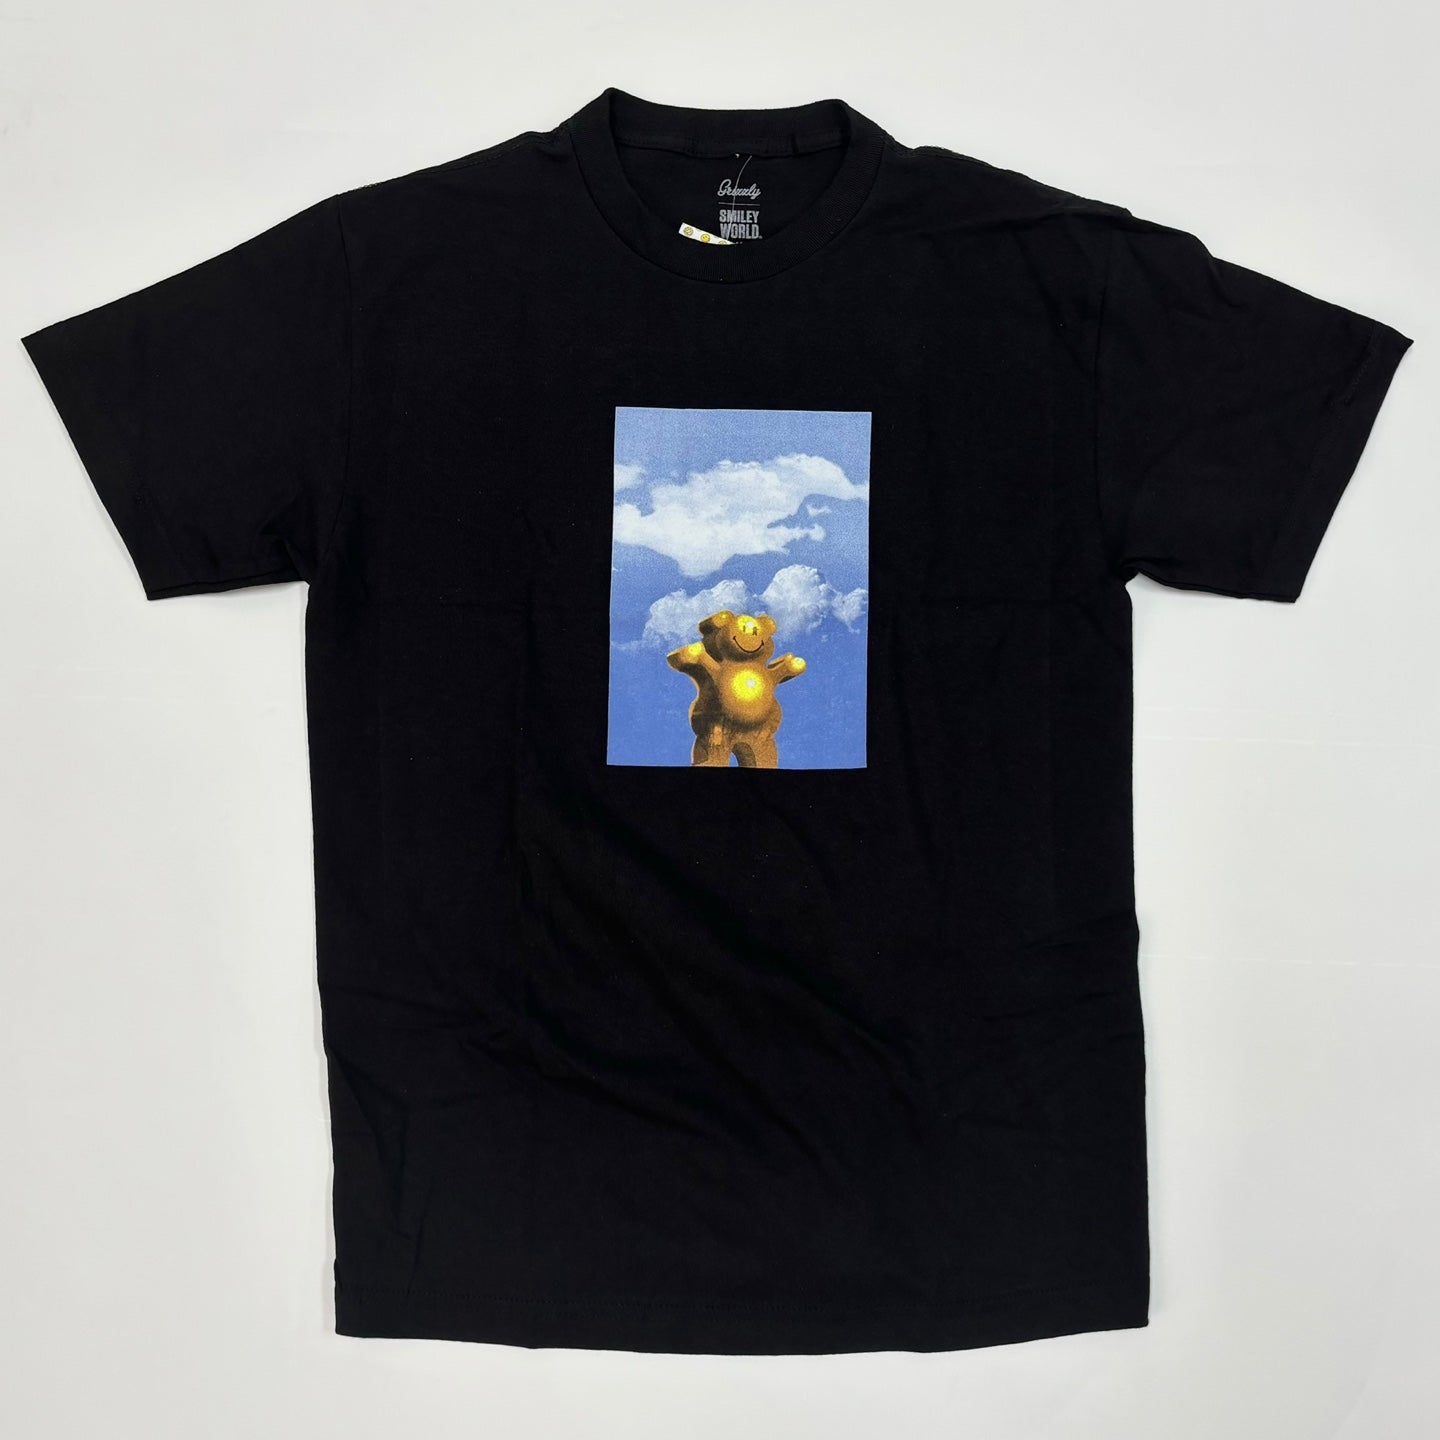 Grizzly x Smiley World Larger Than Life Graphic T-shirt